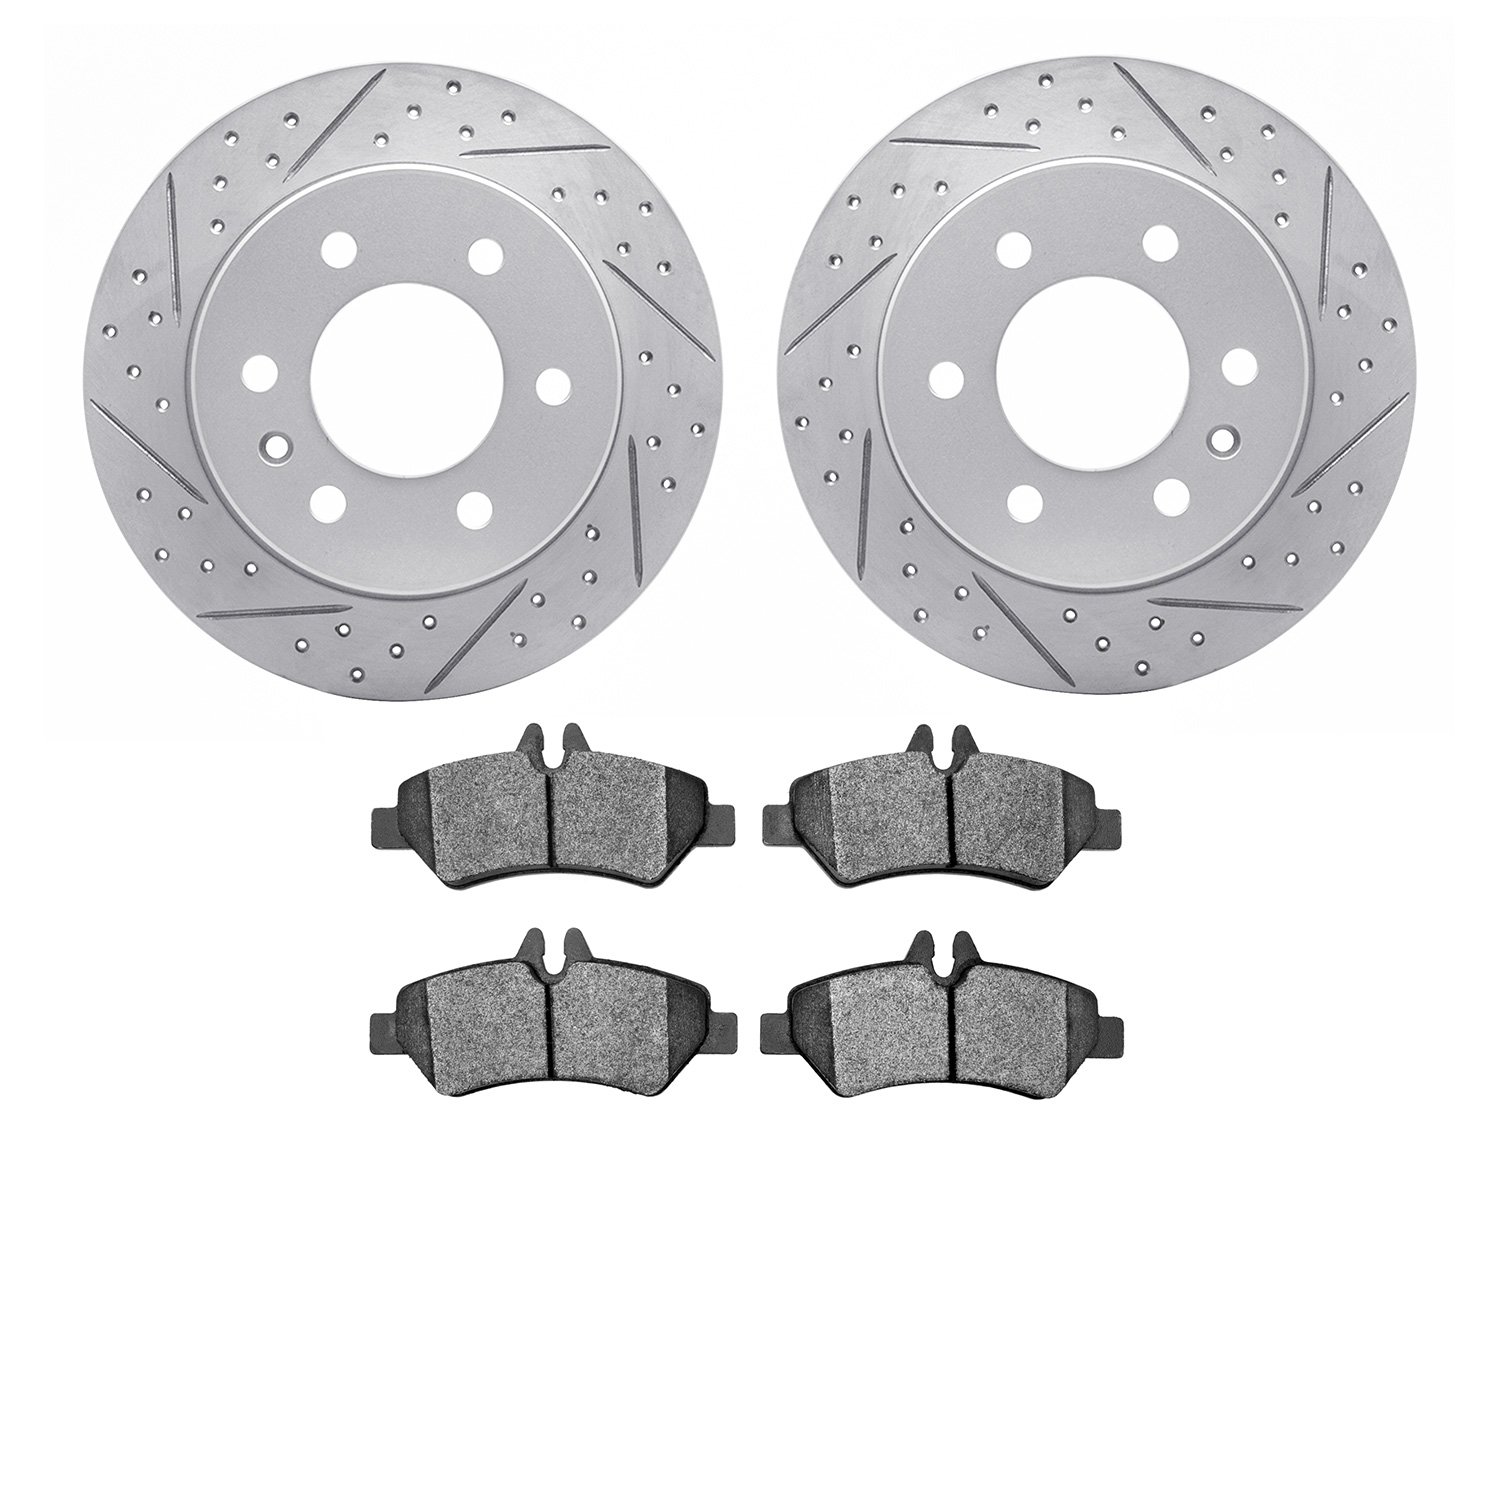 2202-40030 Geoperformance Drilled/Slotted Rotors w/Heavy-Duty Pads Kit, 2007-2018 Multiple Makes/Models, Position: Rear